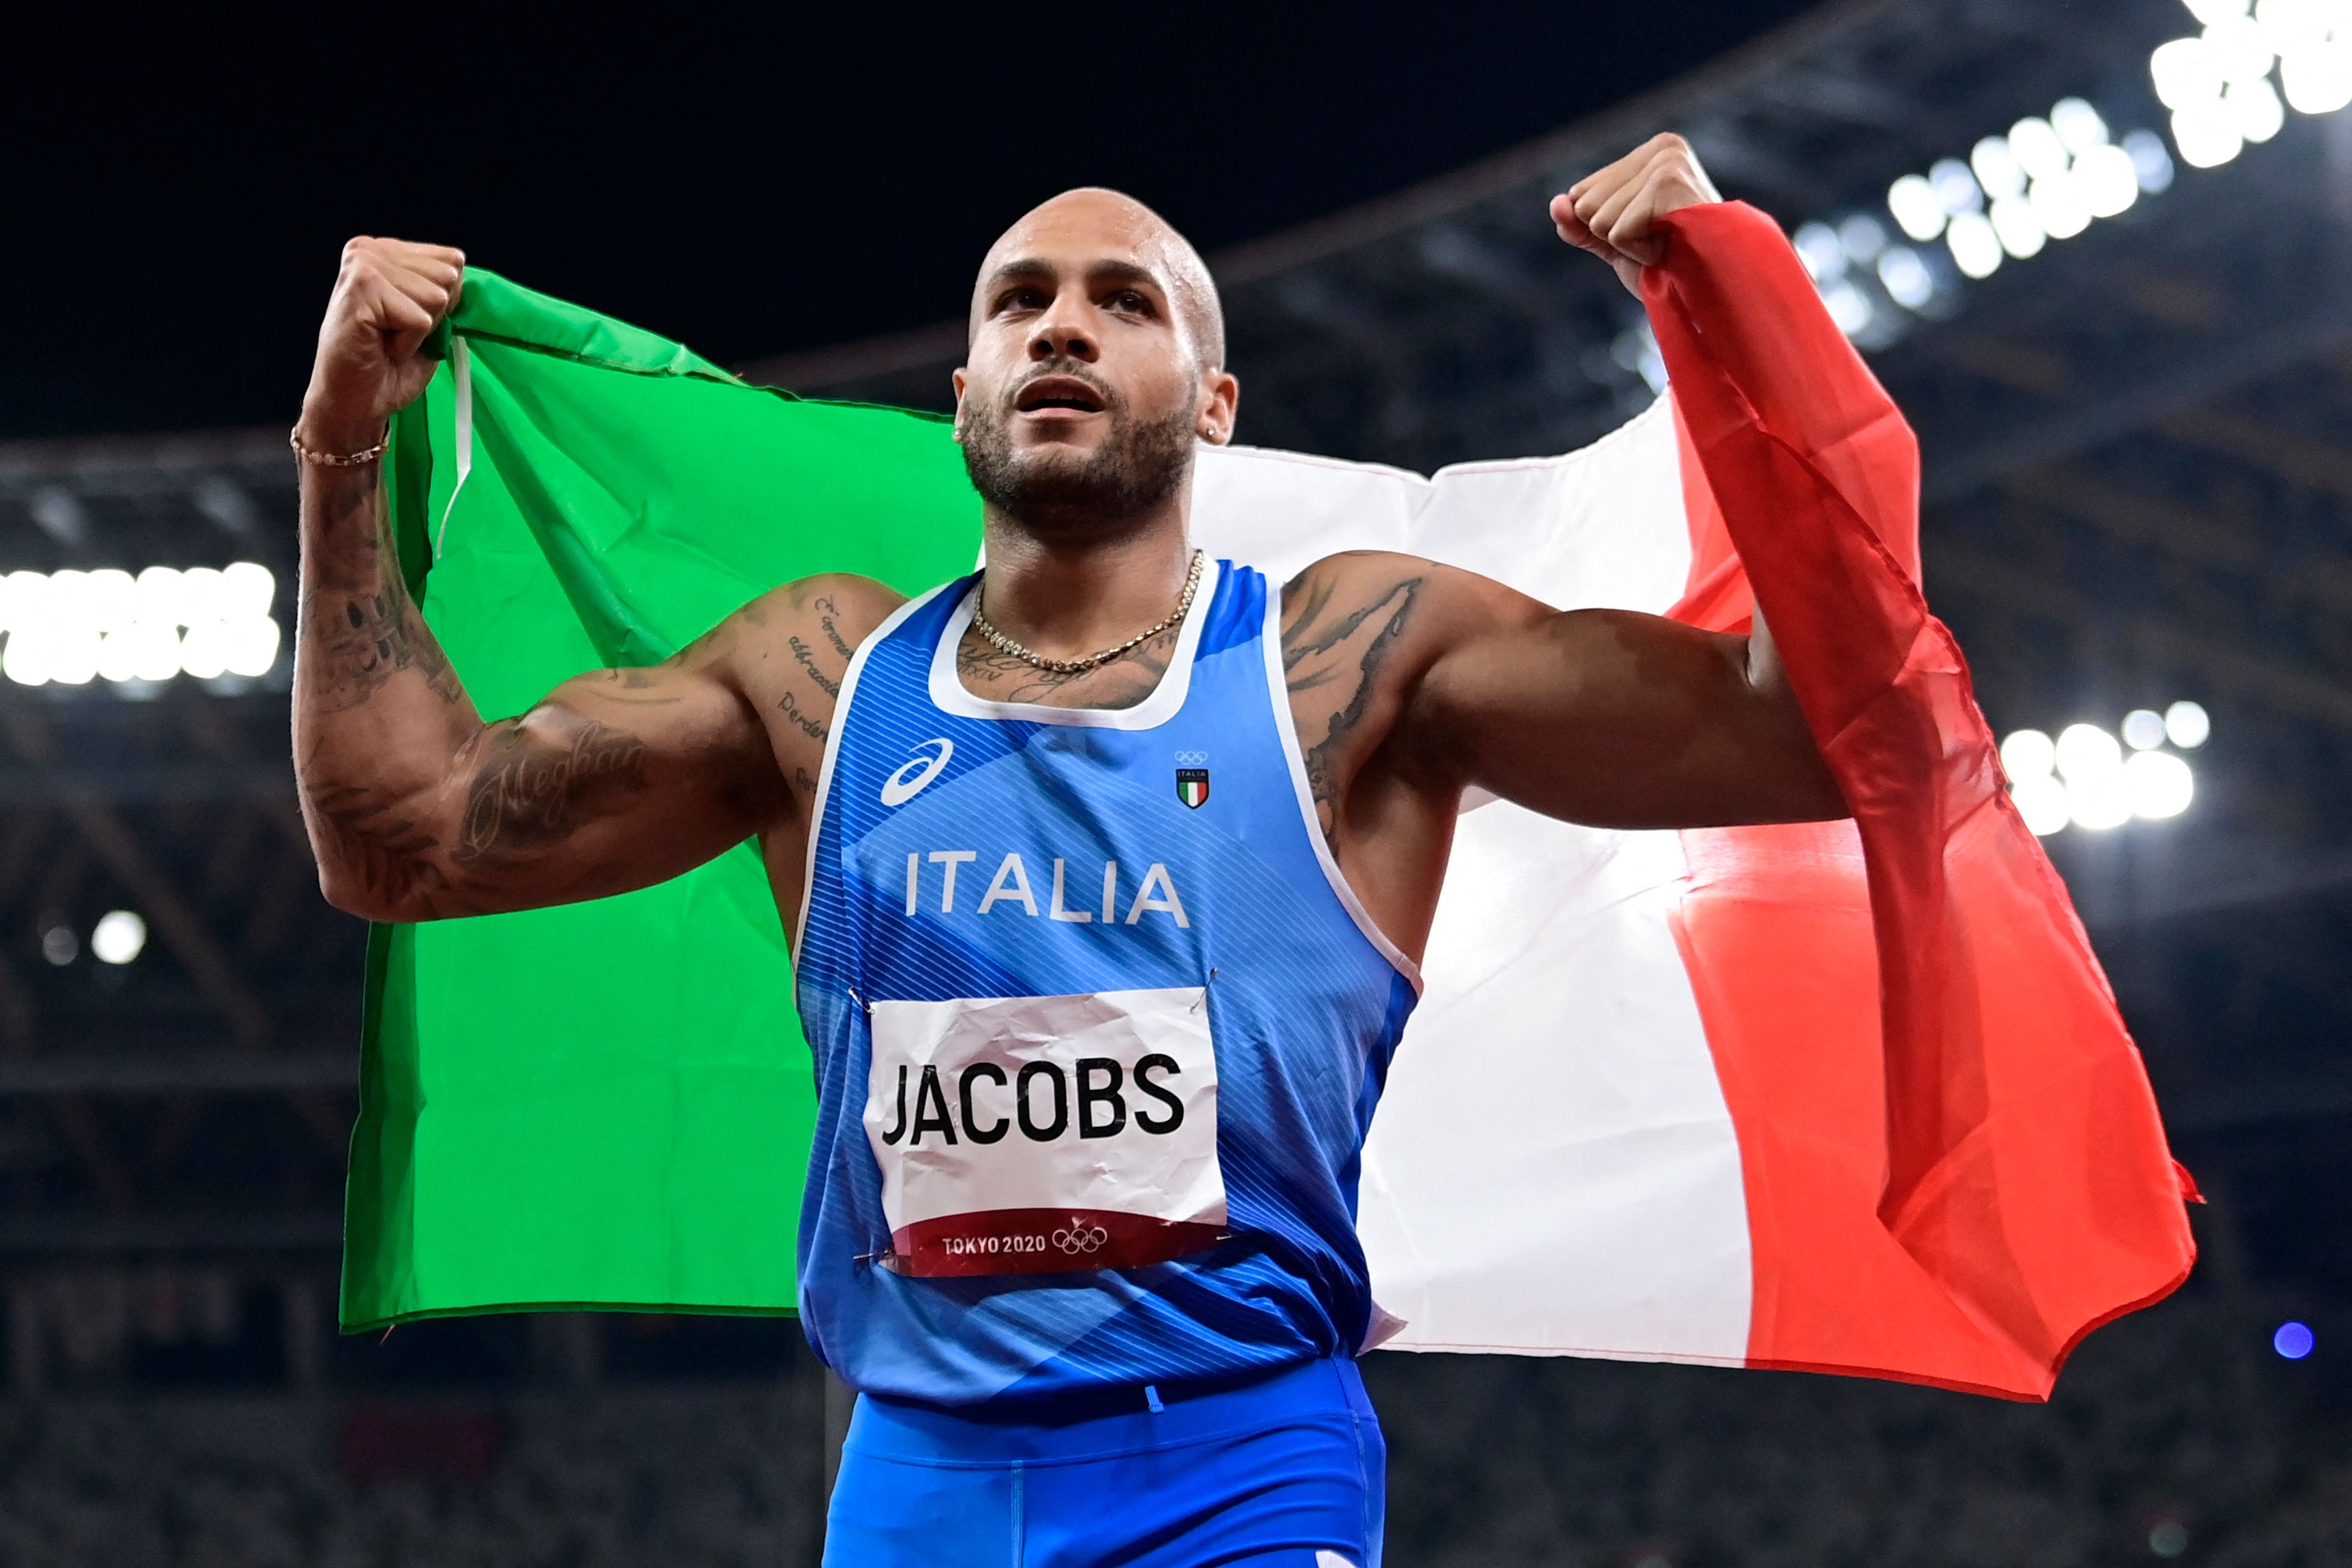 Jacobs celebrates becoming Olympic 100m champion